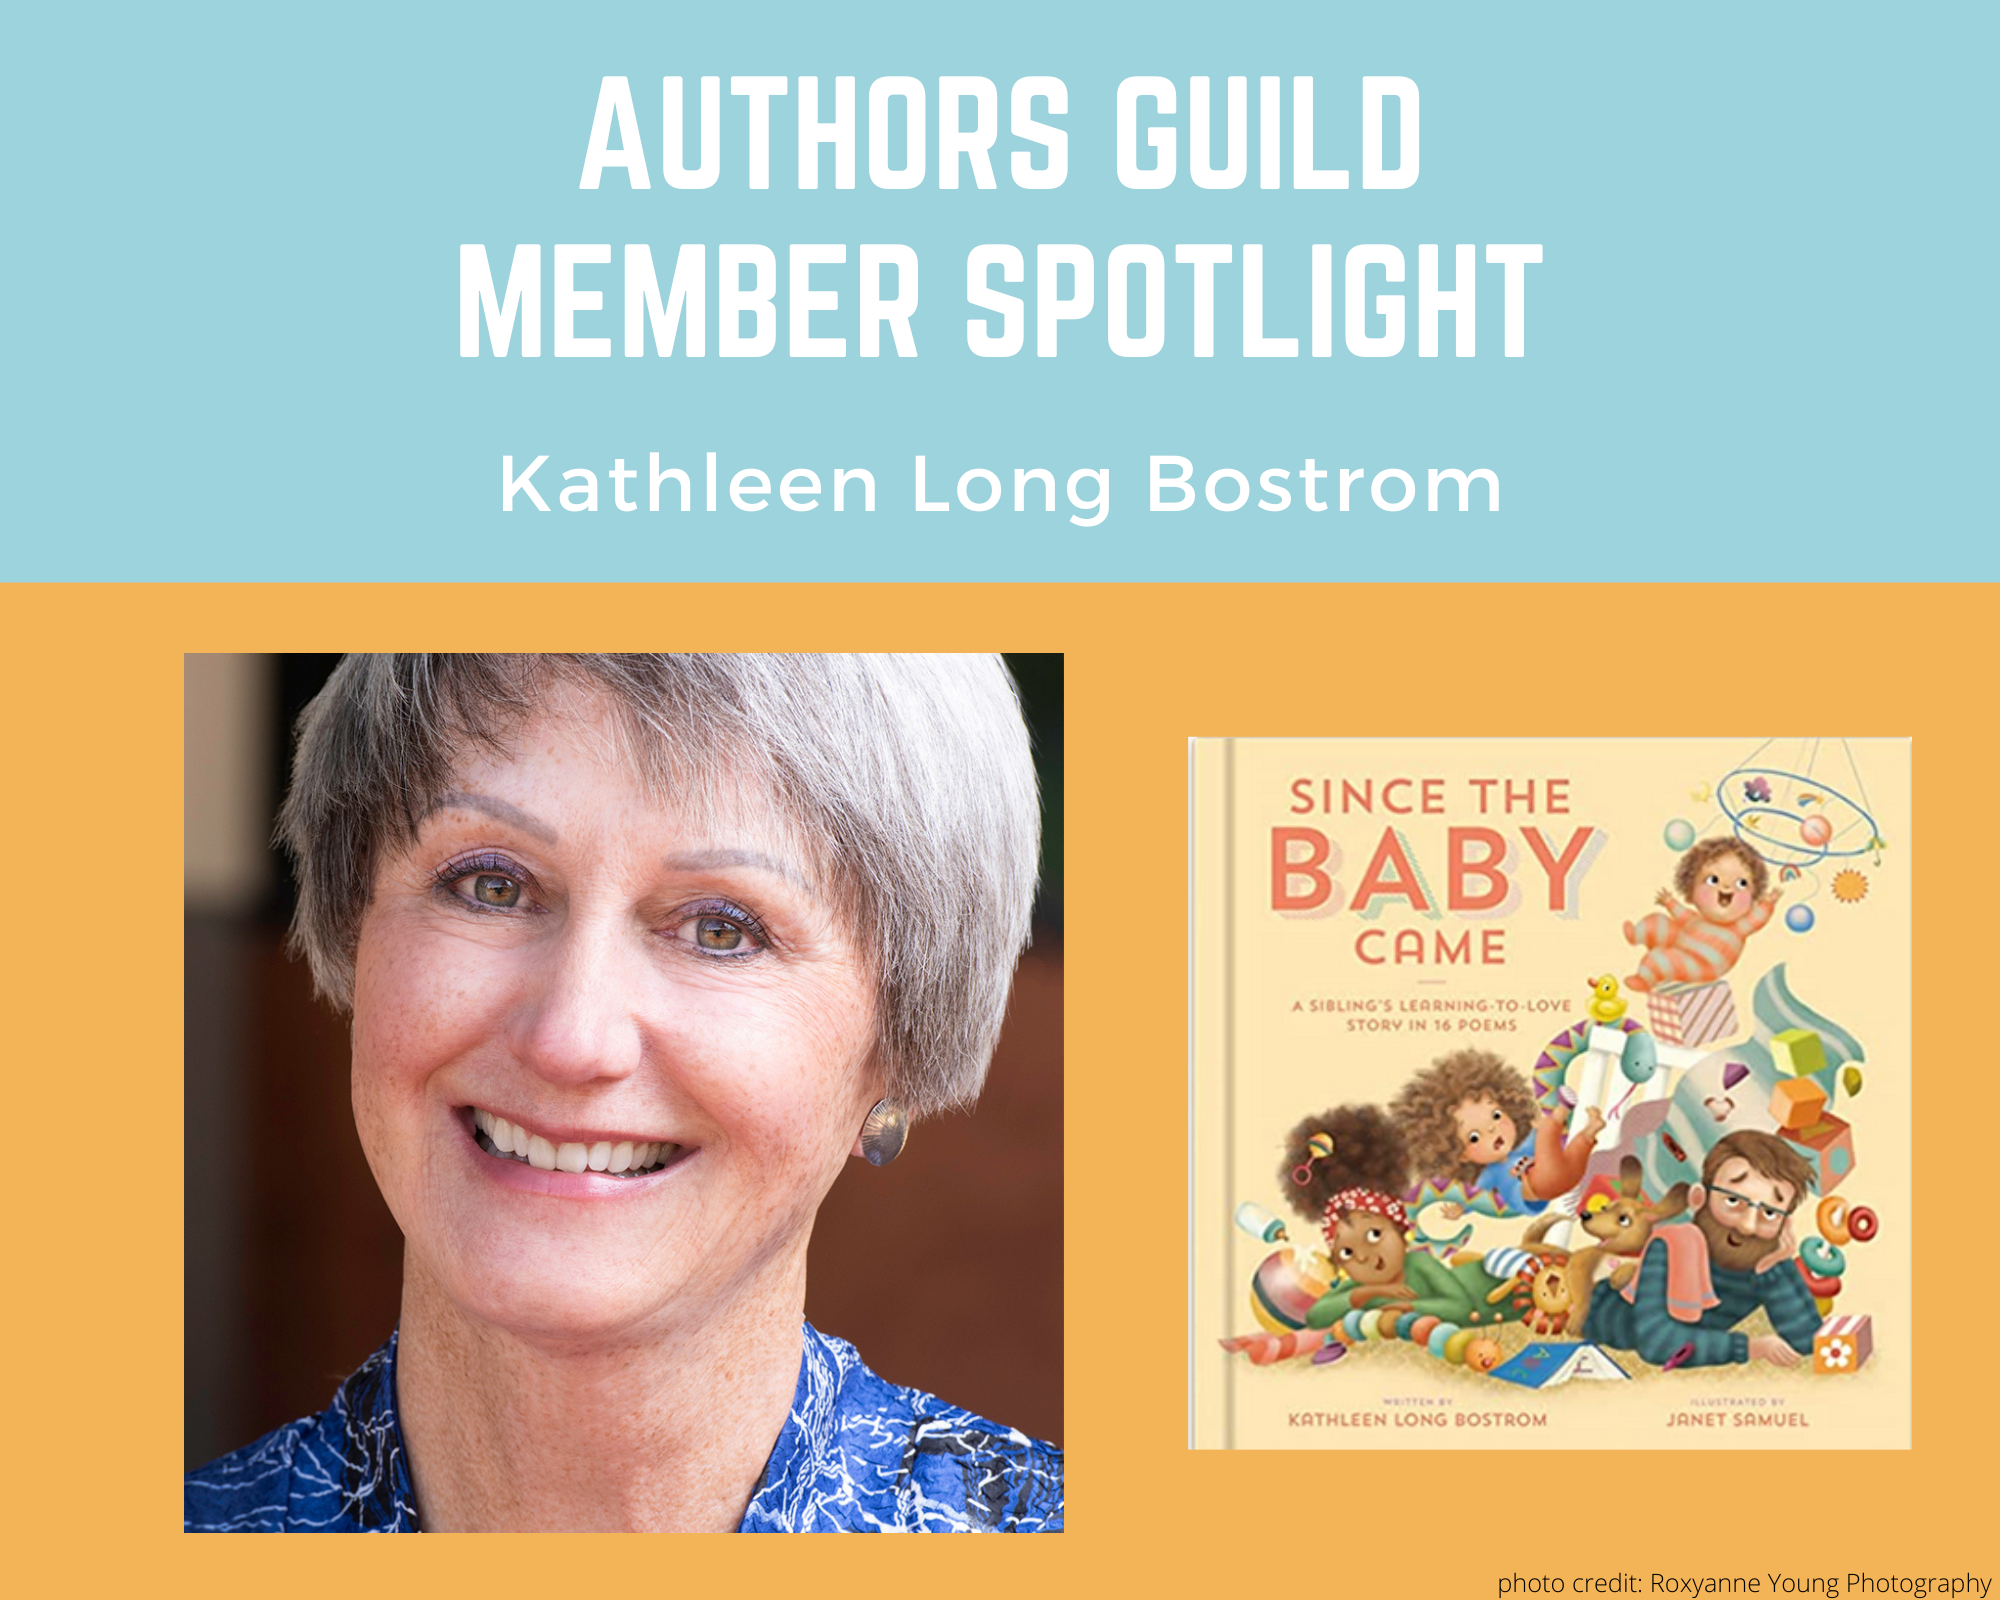 author Kathleen Long Bostrom and an image of her book Since the Baby Came